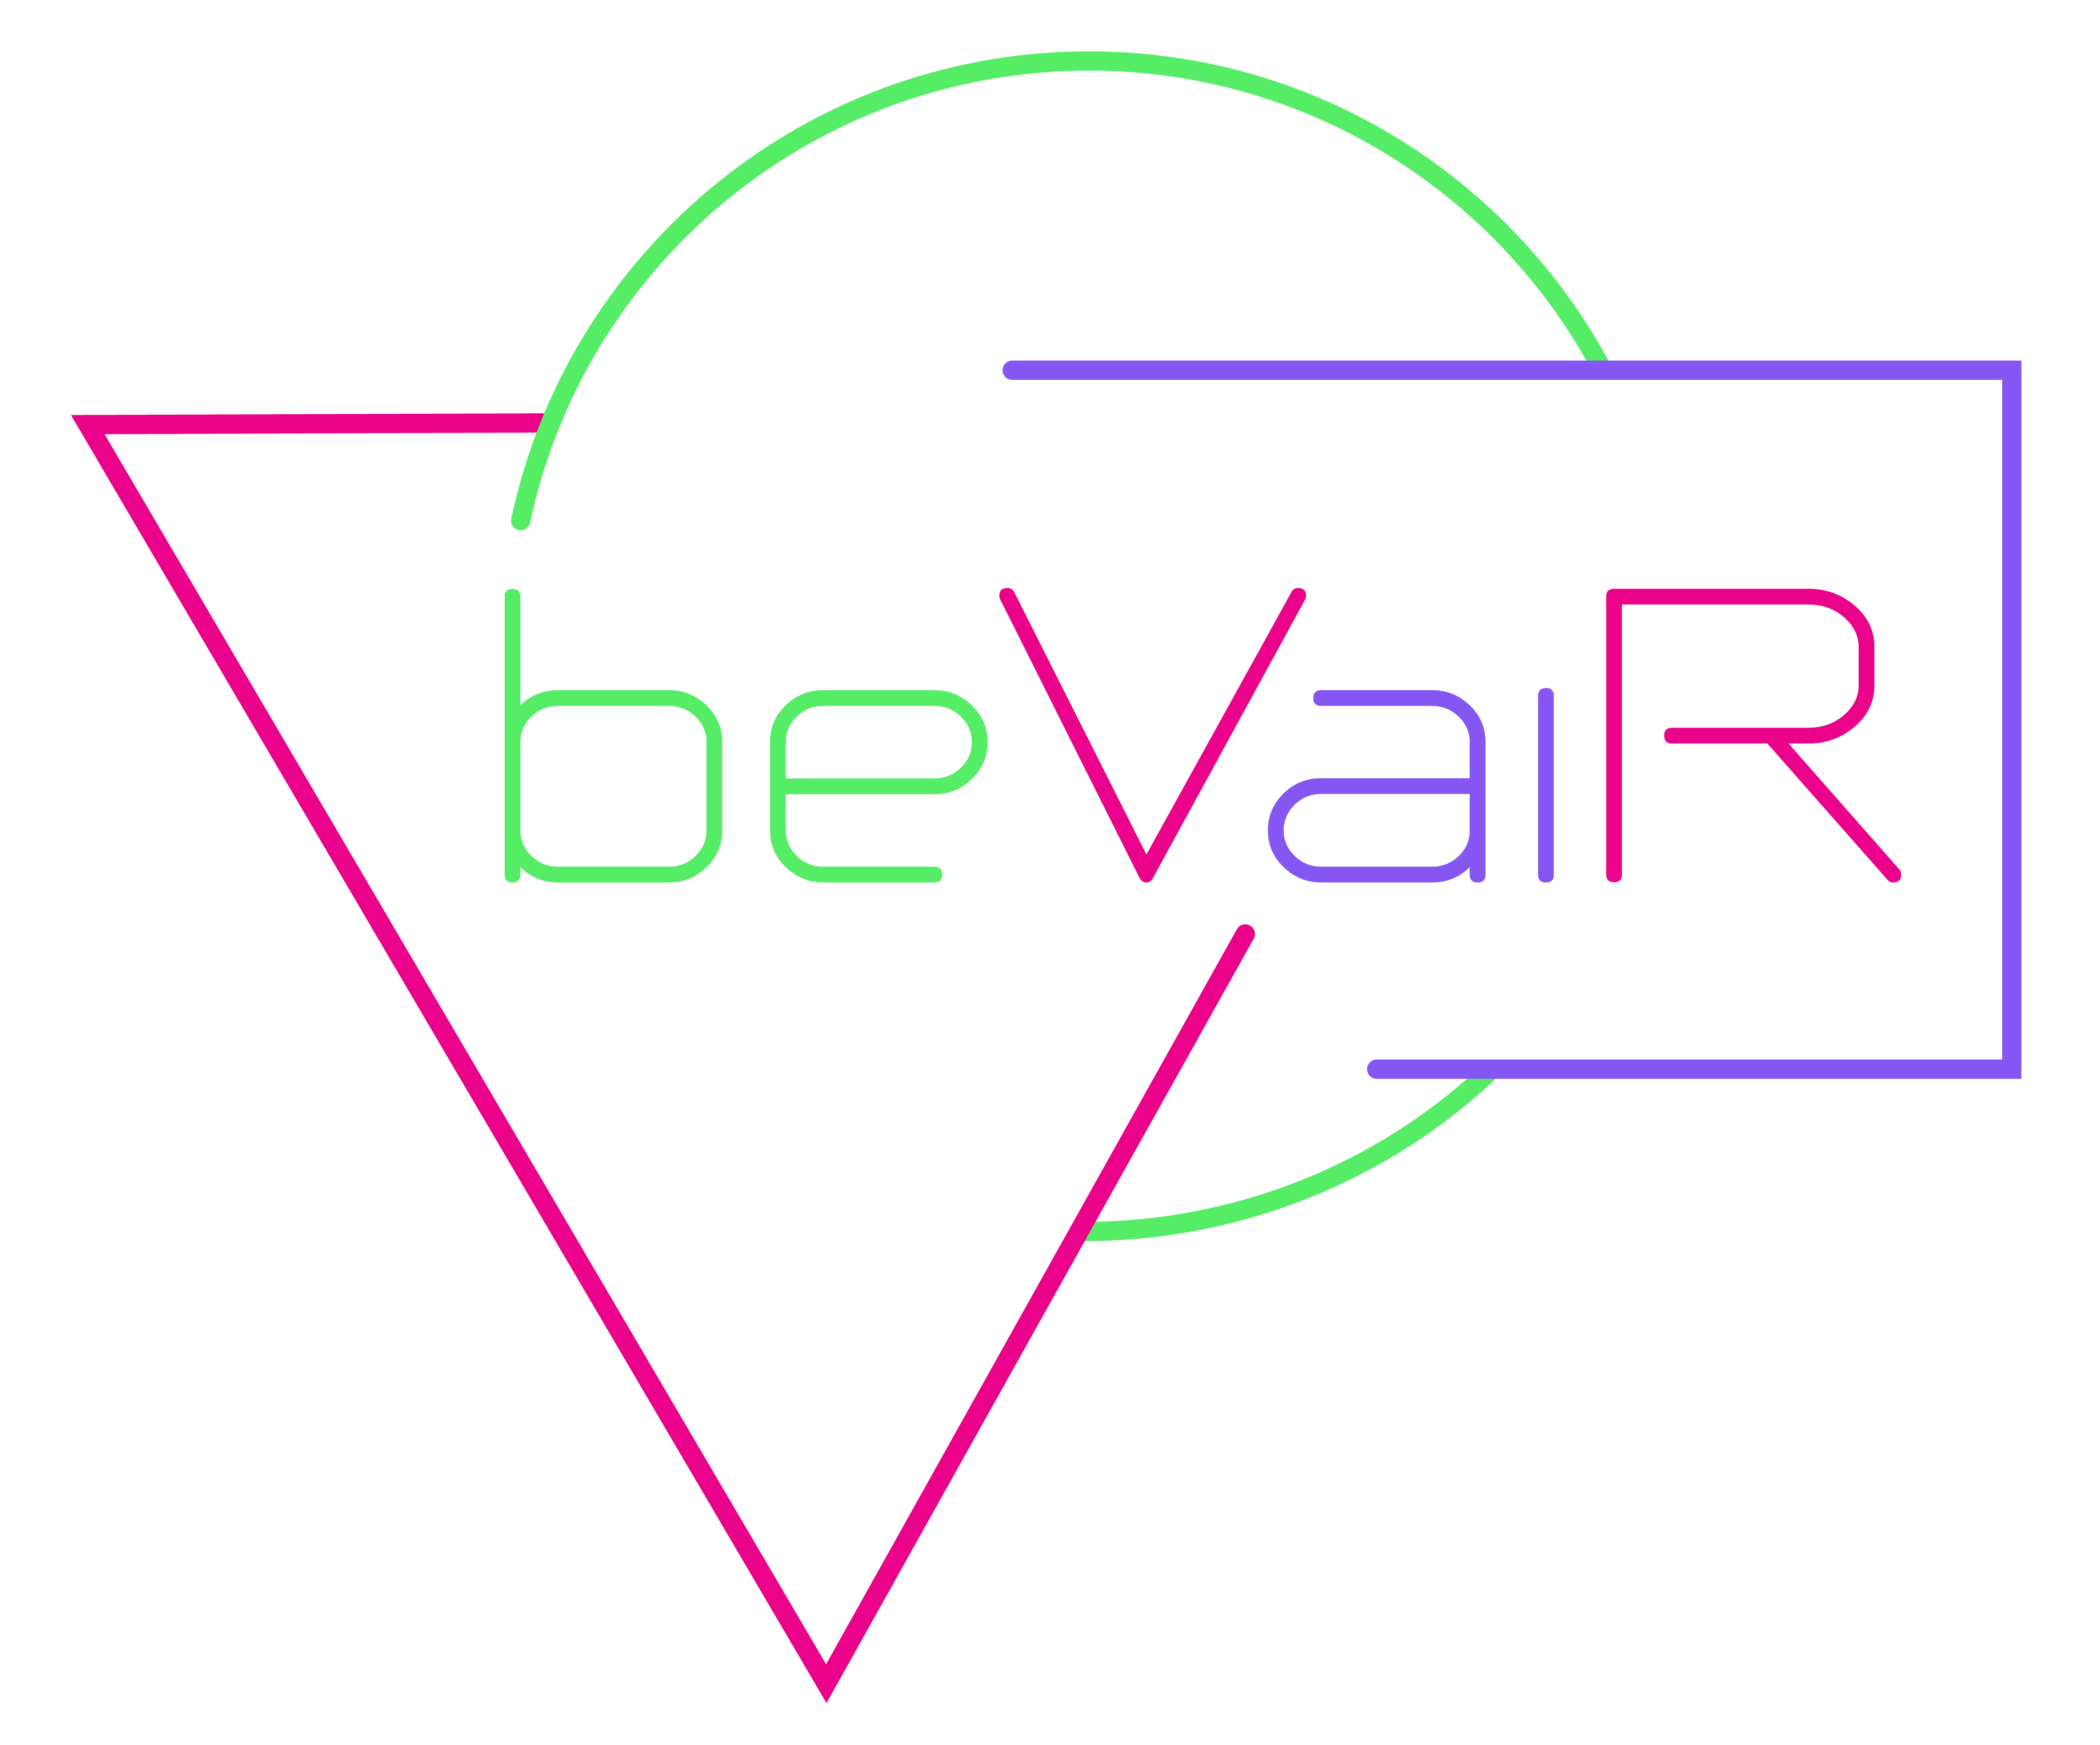 beVaiR logo. Composed shape which consists of a pink triangle, a green circle and a violett rectangle with the name beVaiR in the middle.